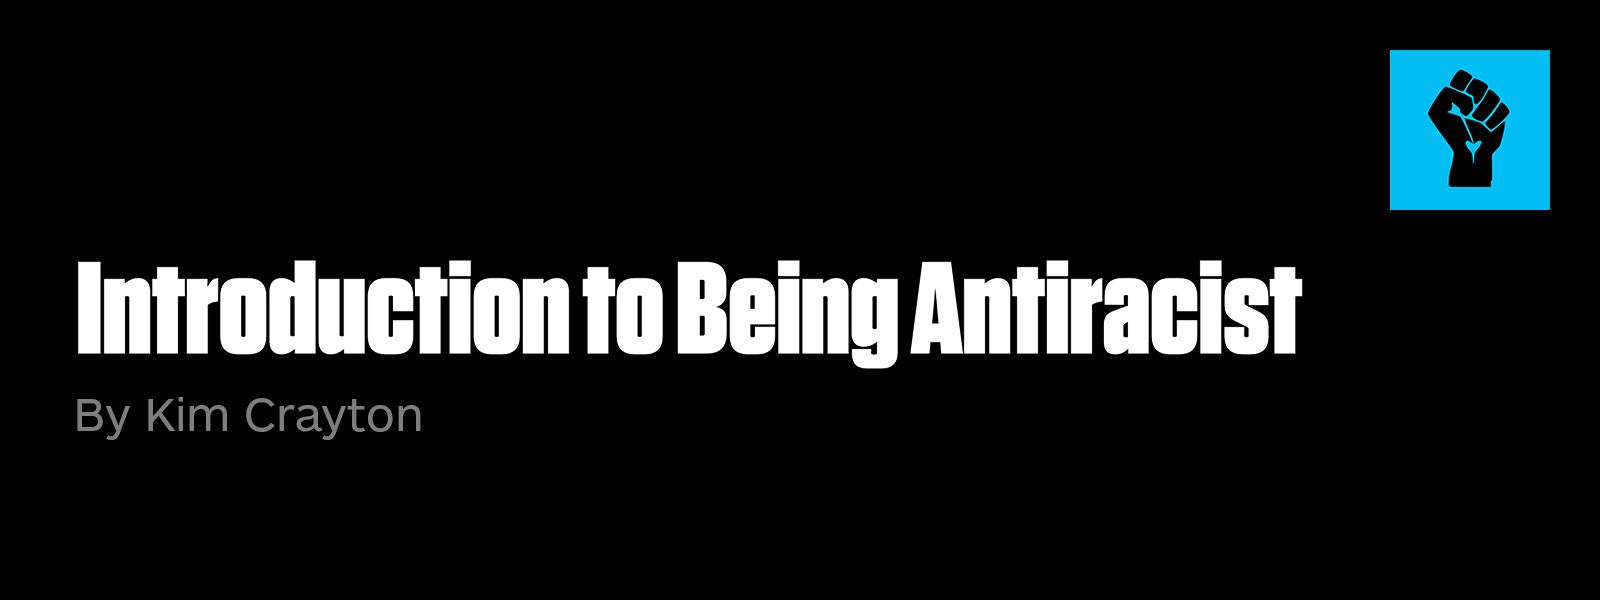 Introduction to Being an Antiracist banner image